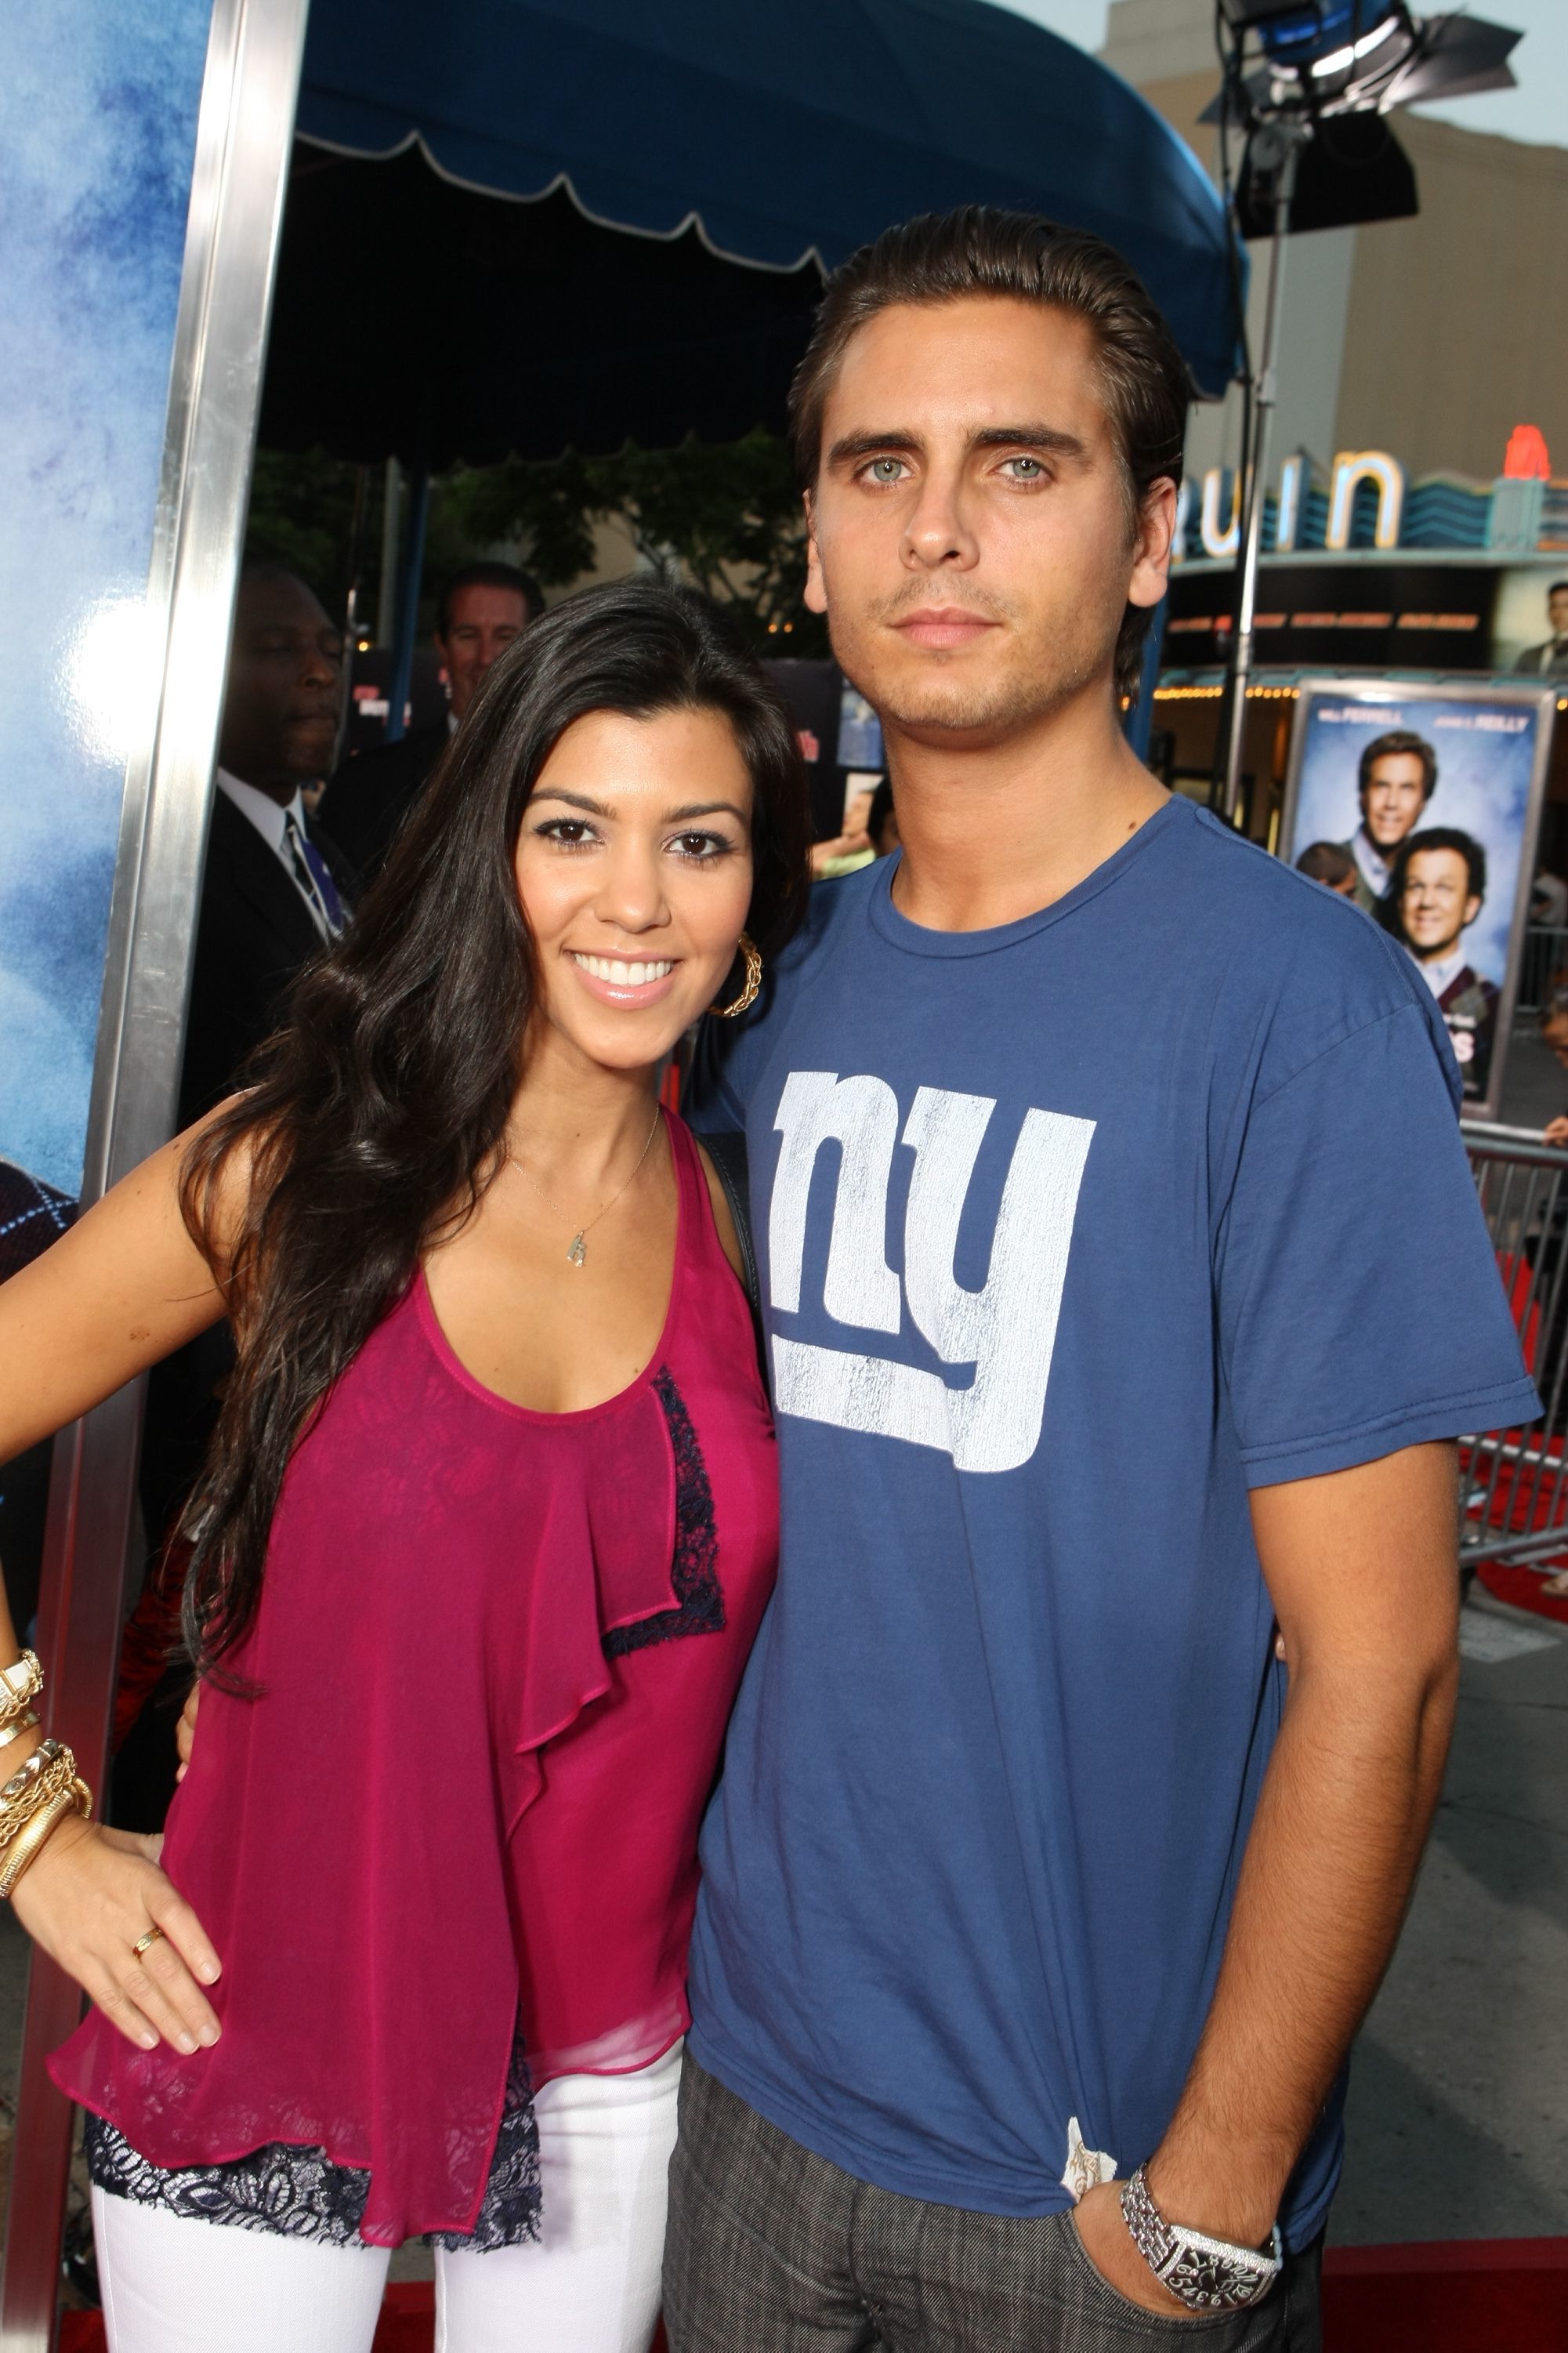 <p>In March 2015, <a href="https://www.wonderwall.com/celebrity/profiles/overview/kourtney-kardashian-637.article">Kourtney Kardashian</a> shared an epic throwback pic on Instagram: A <a href="https://www.instagram.com/p/0wJnvZE1mk/">snapshot</a> from the night she met baby daddy (and now-ex) <a href="https://www.wonderwall.com/celebrity/profiles/overview/scott-disick-1300.article">Scott Disick</a> at "Girls Gone Wild" mogul Joe Francis' vacation home in Mexico in 2006. "#FBF The night I met @letthelordbewithyou," she captioned the photo that shows a baby-faced Scott and Kourtney on either side of Joe. "Scott came as the guest as a friend of mine," Joe told In Touch magazine in 2010, "and they met in my master bedroom."</p>